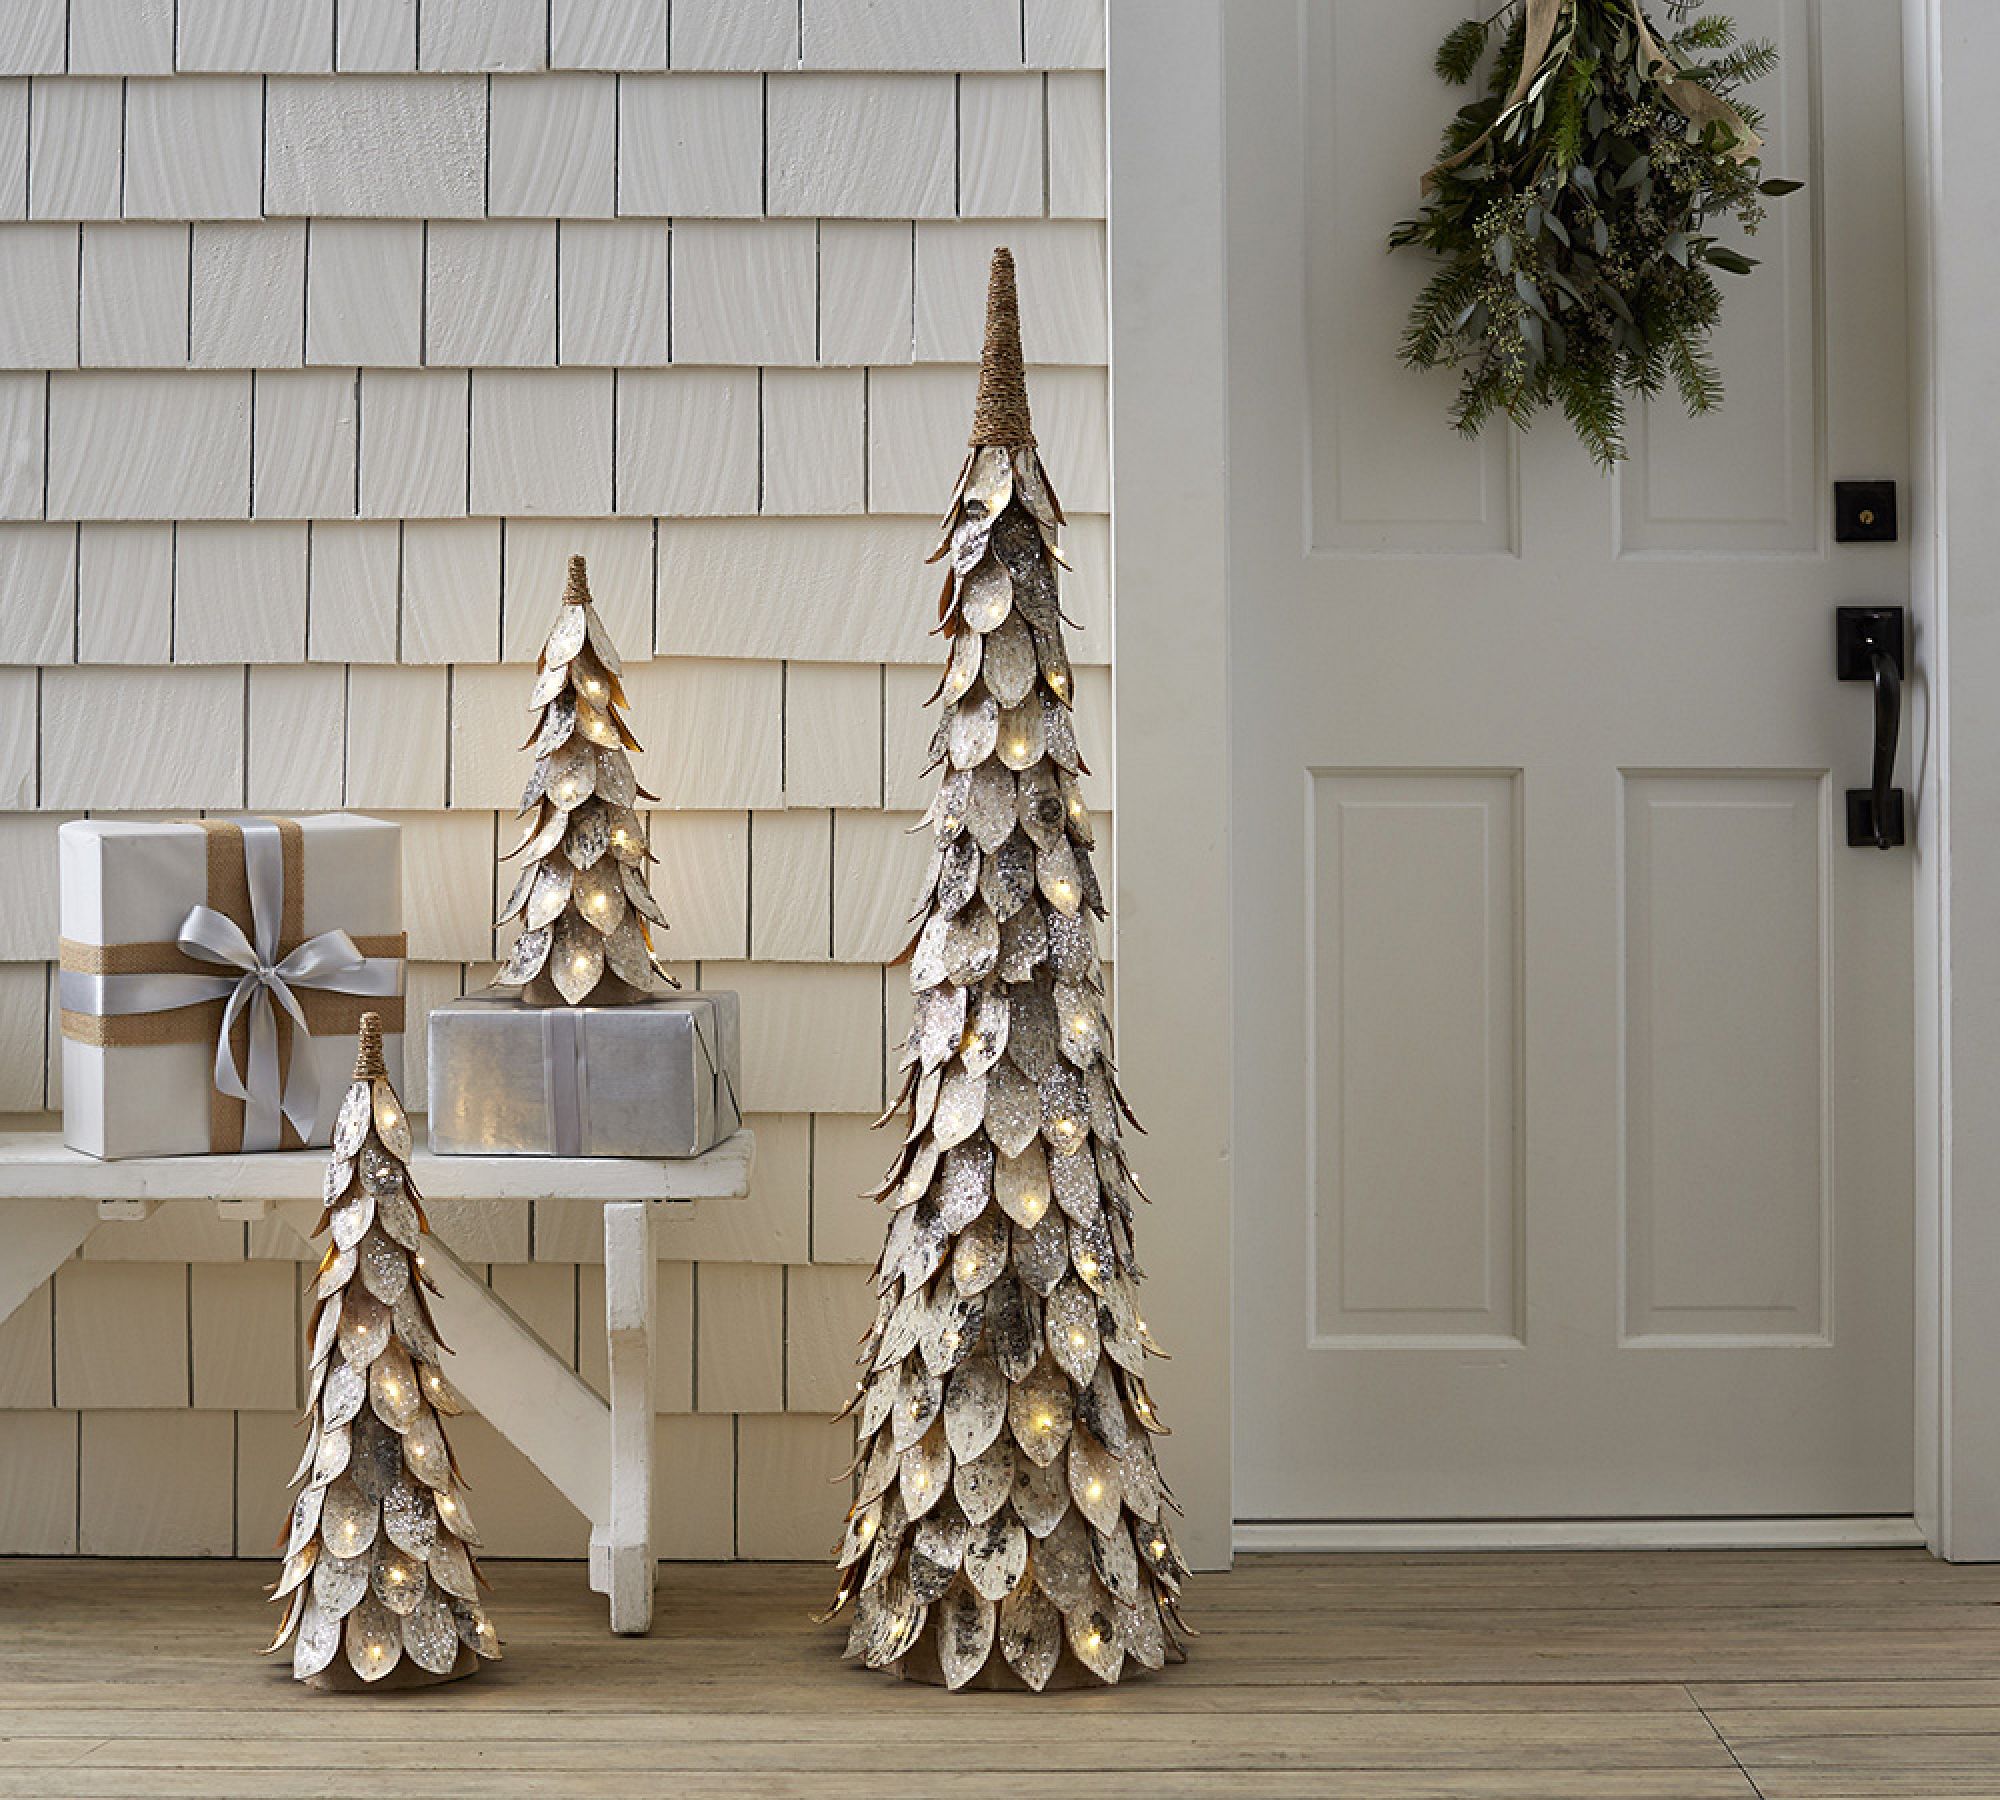 DIY Feather Christmas Trees Designs by Jeana diy - %